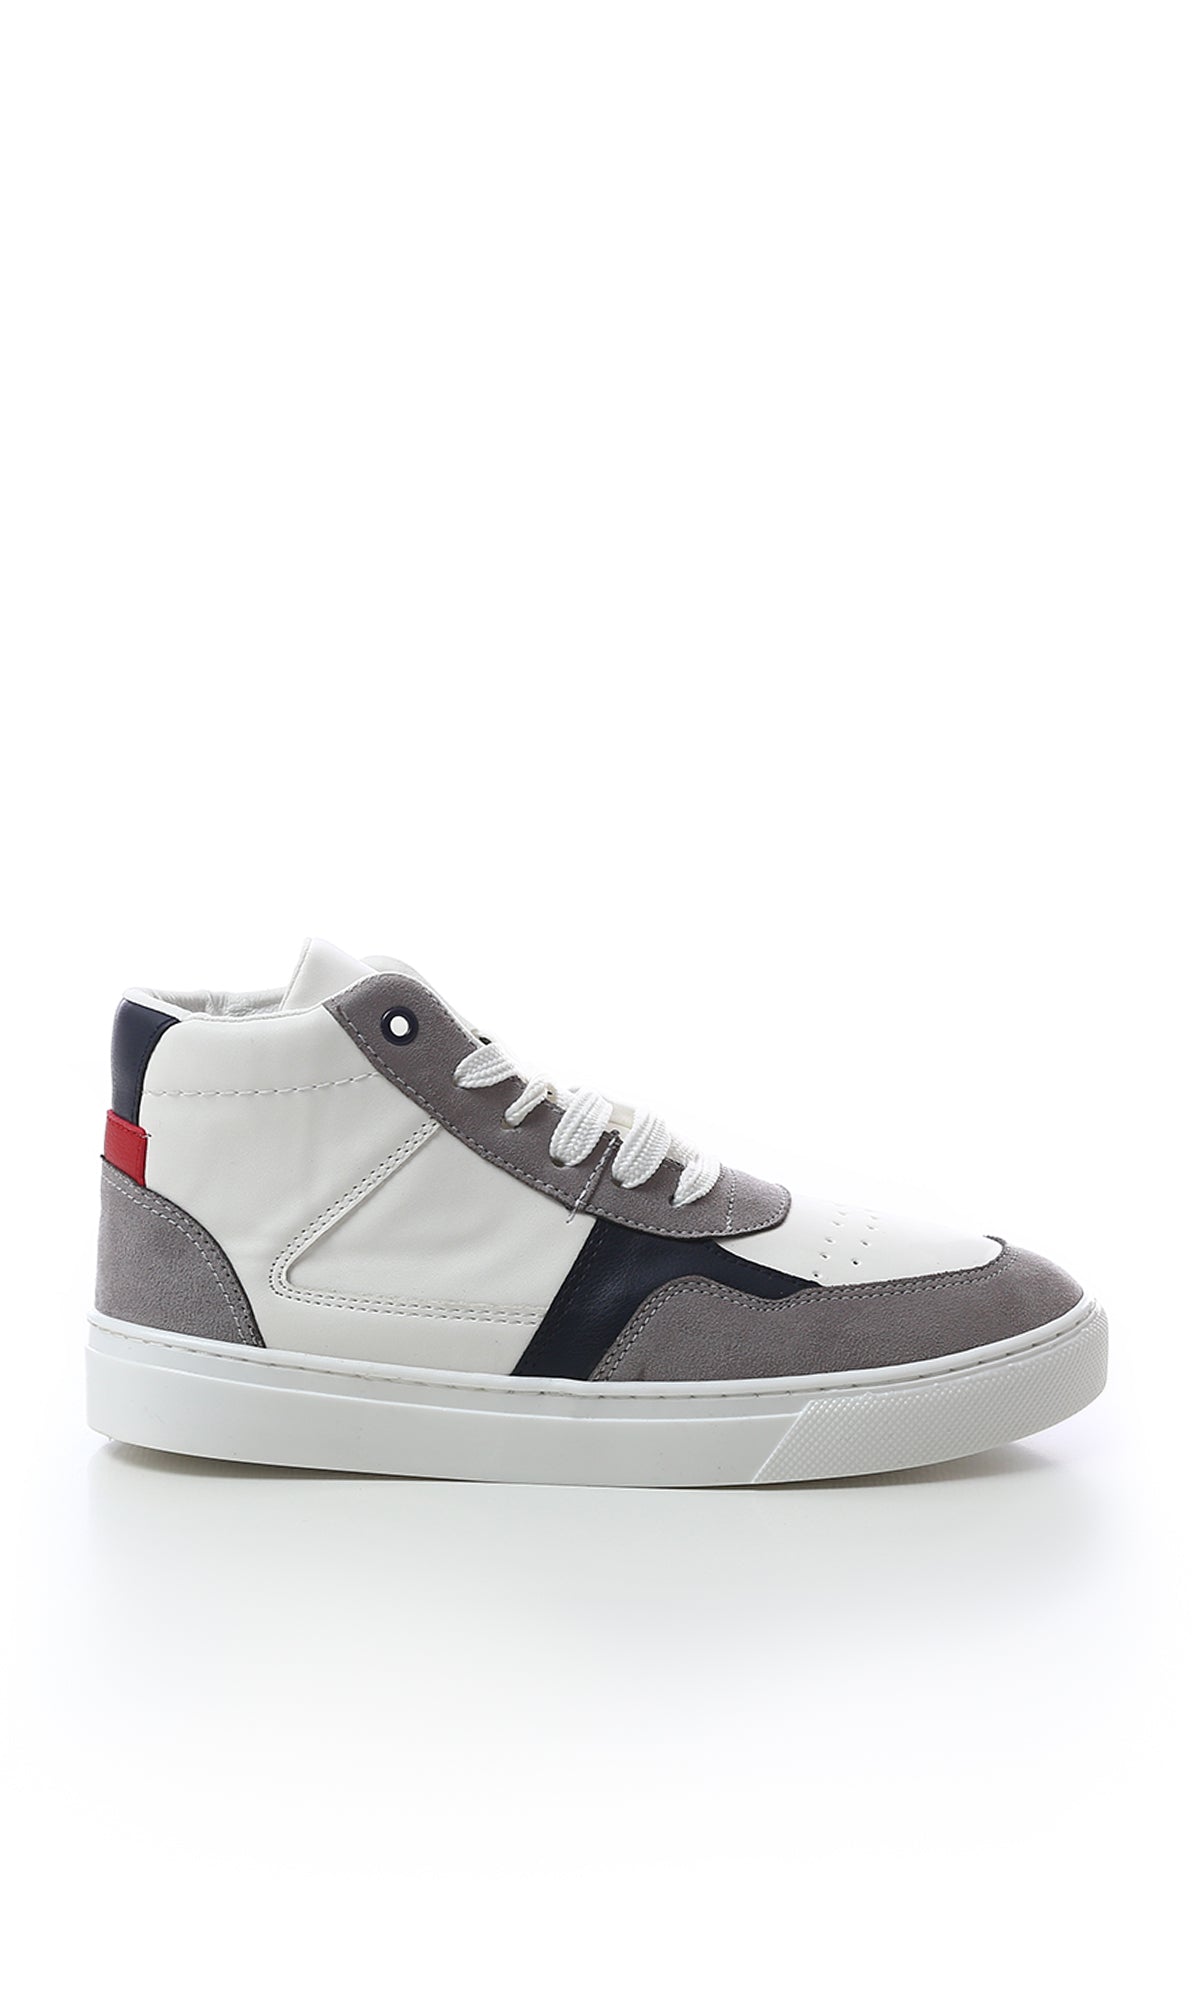 O180408 Tri-Tone Leather High-Neck Casual Shoes - White, Grey Navy Blue